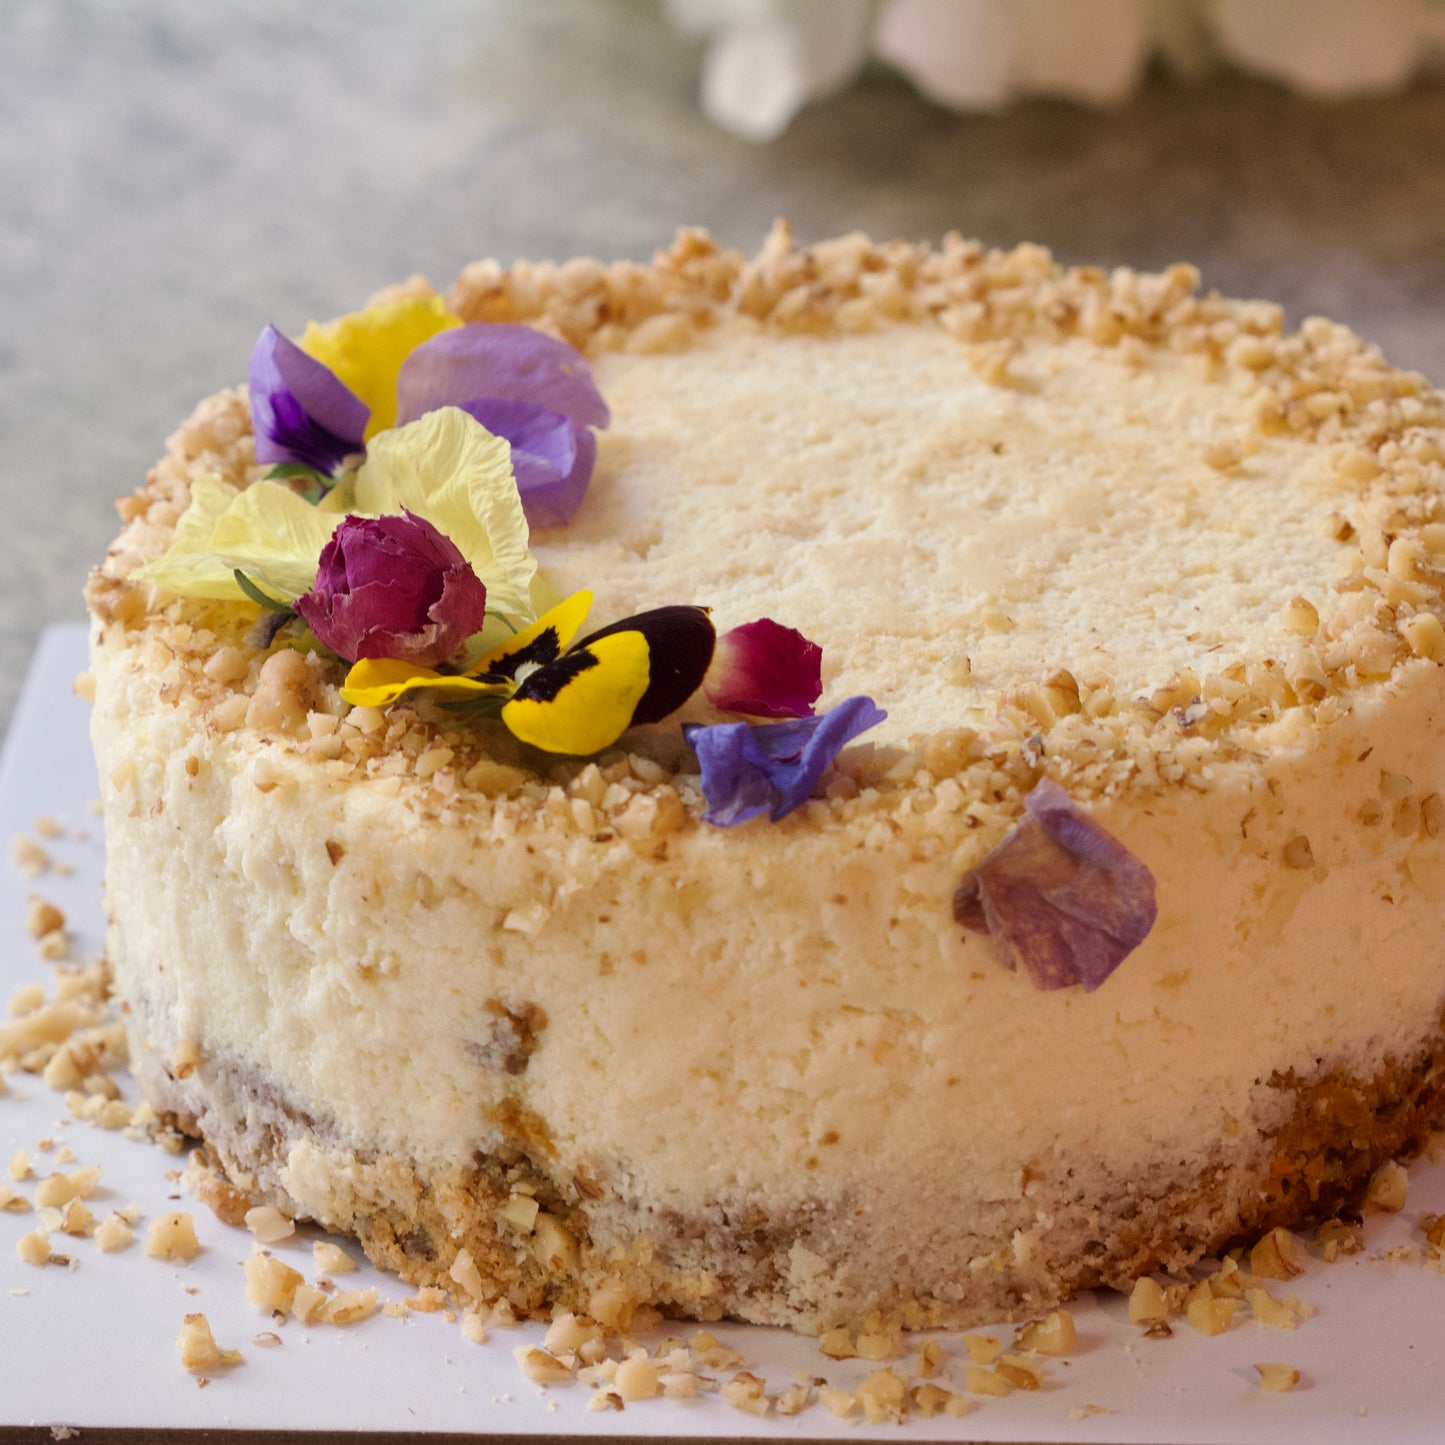 Low calorie/ high Protein Carrot Cheesecake